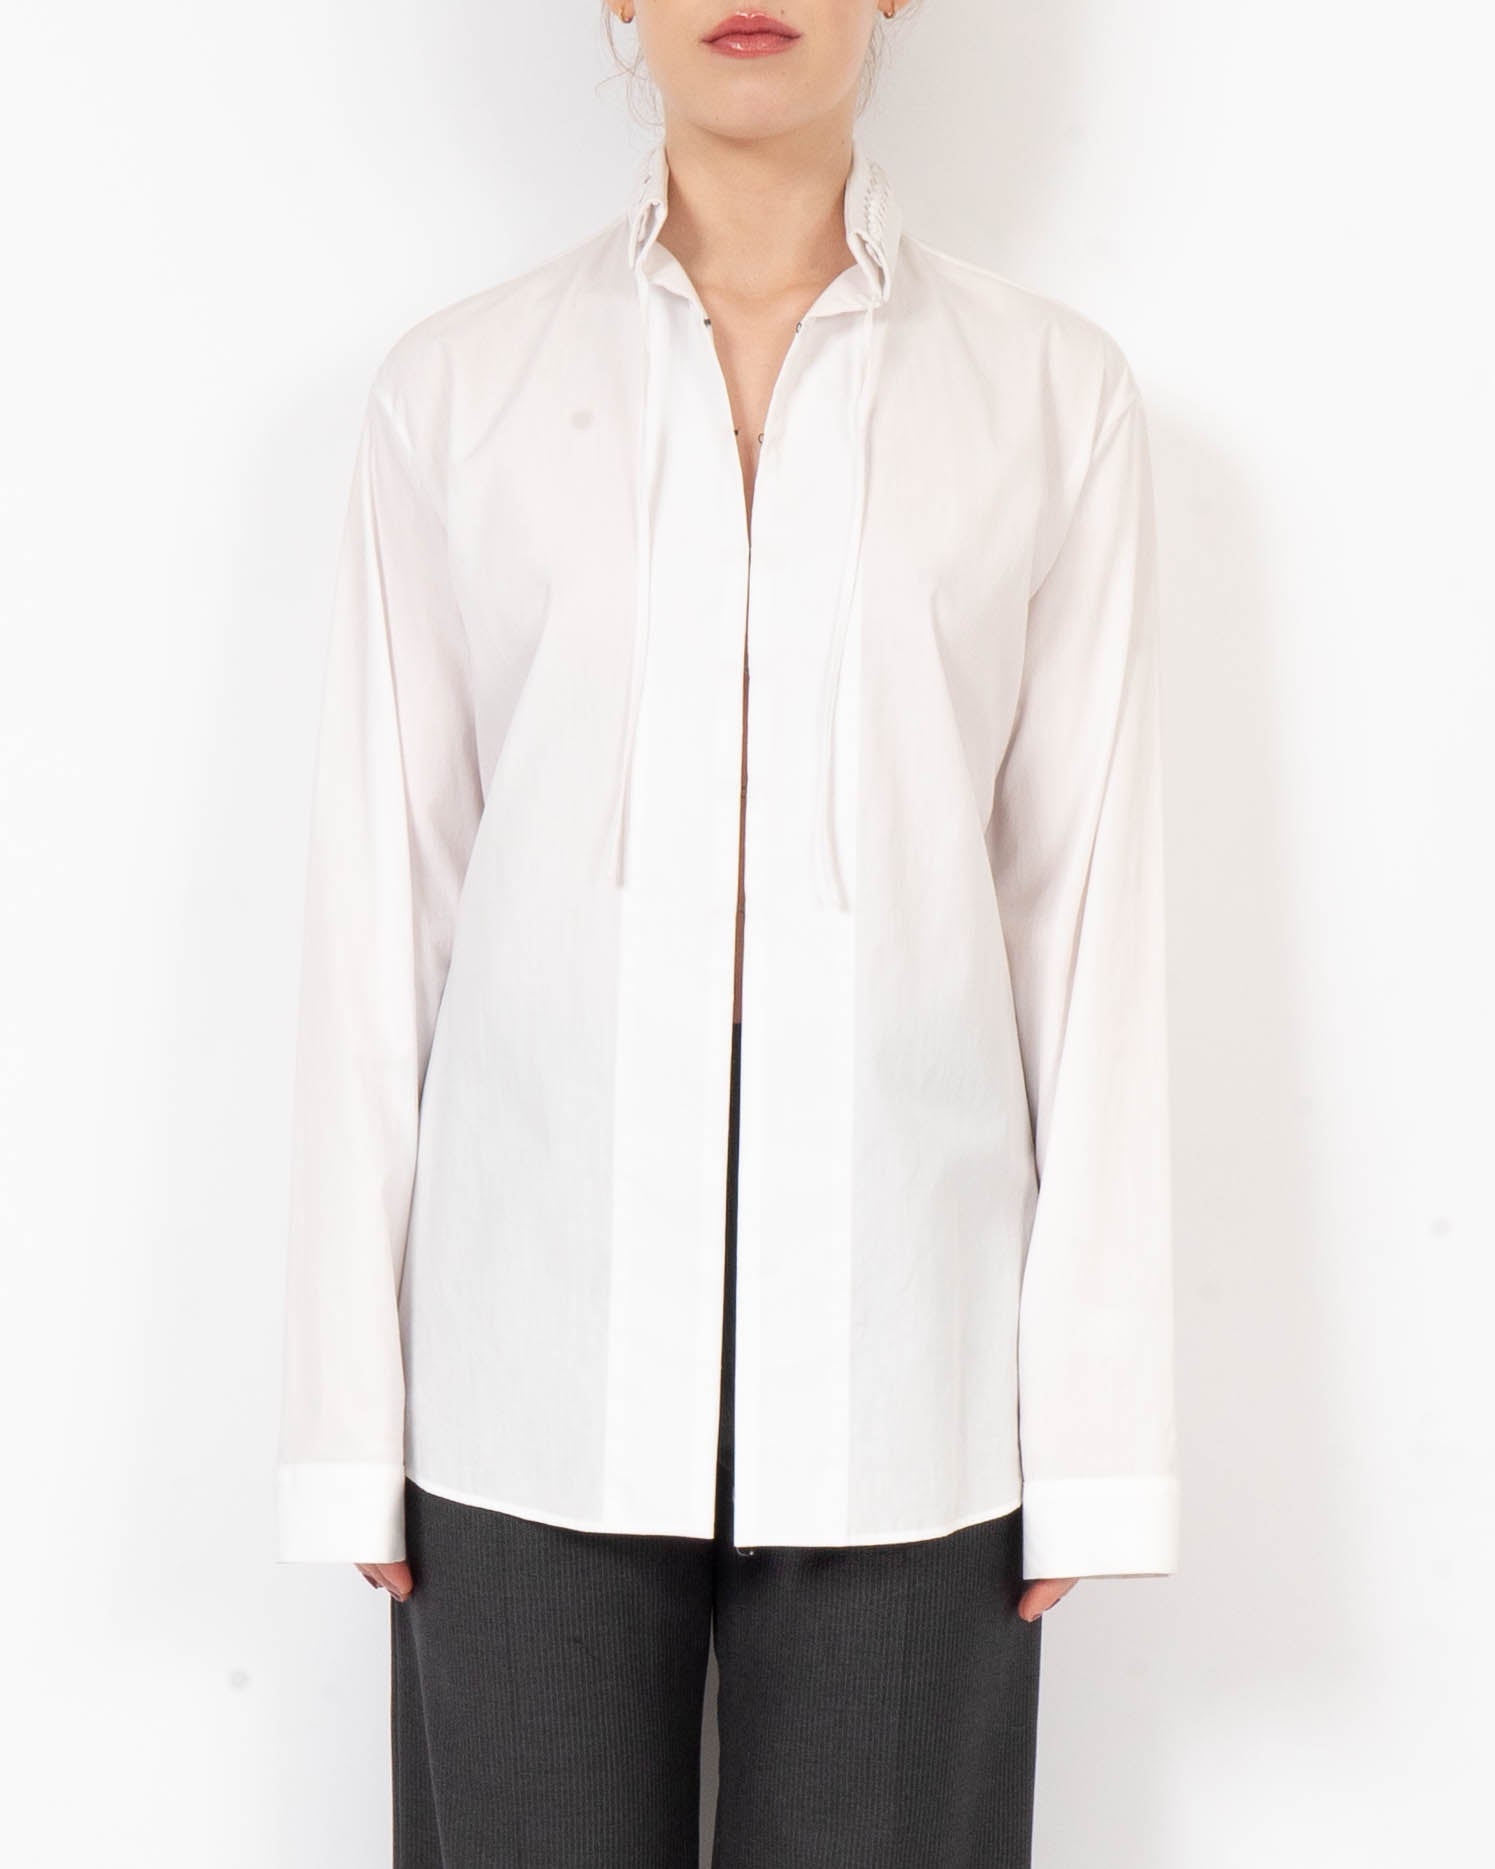 FW19 Laced Collar Shirt in White Cotton